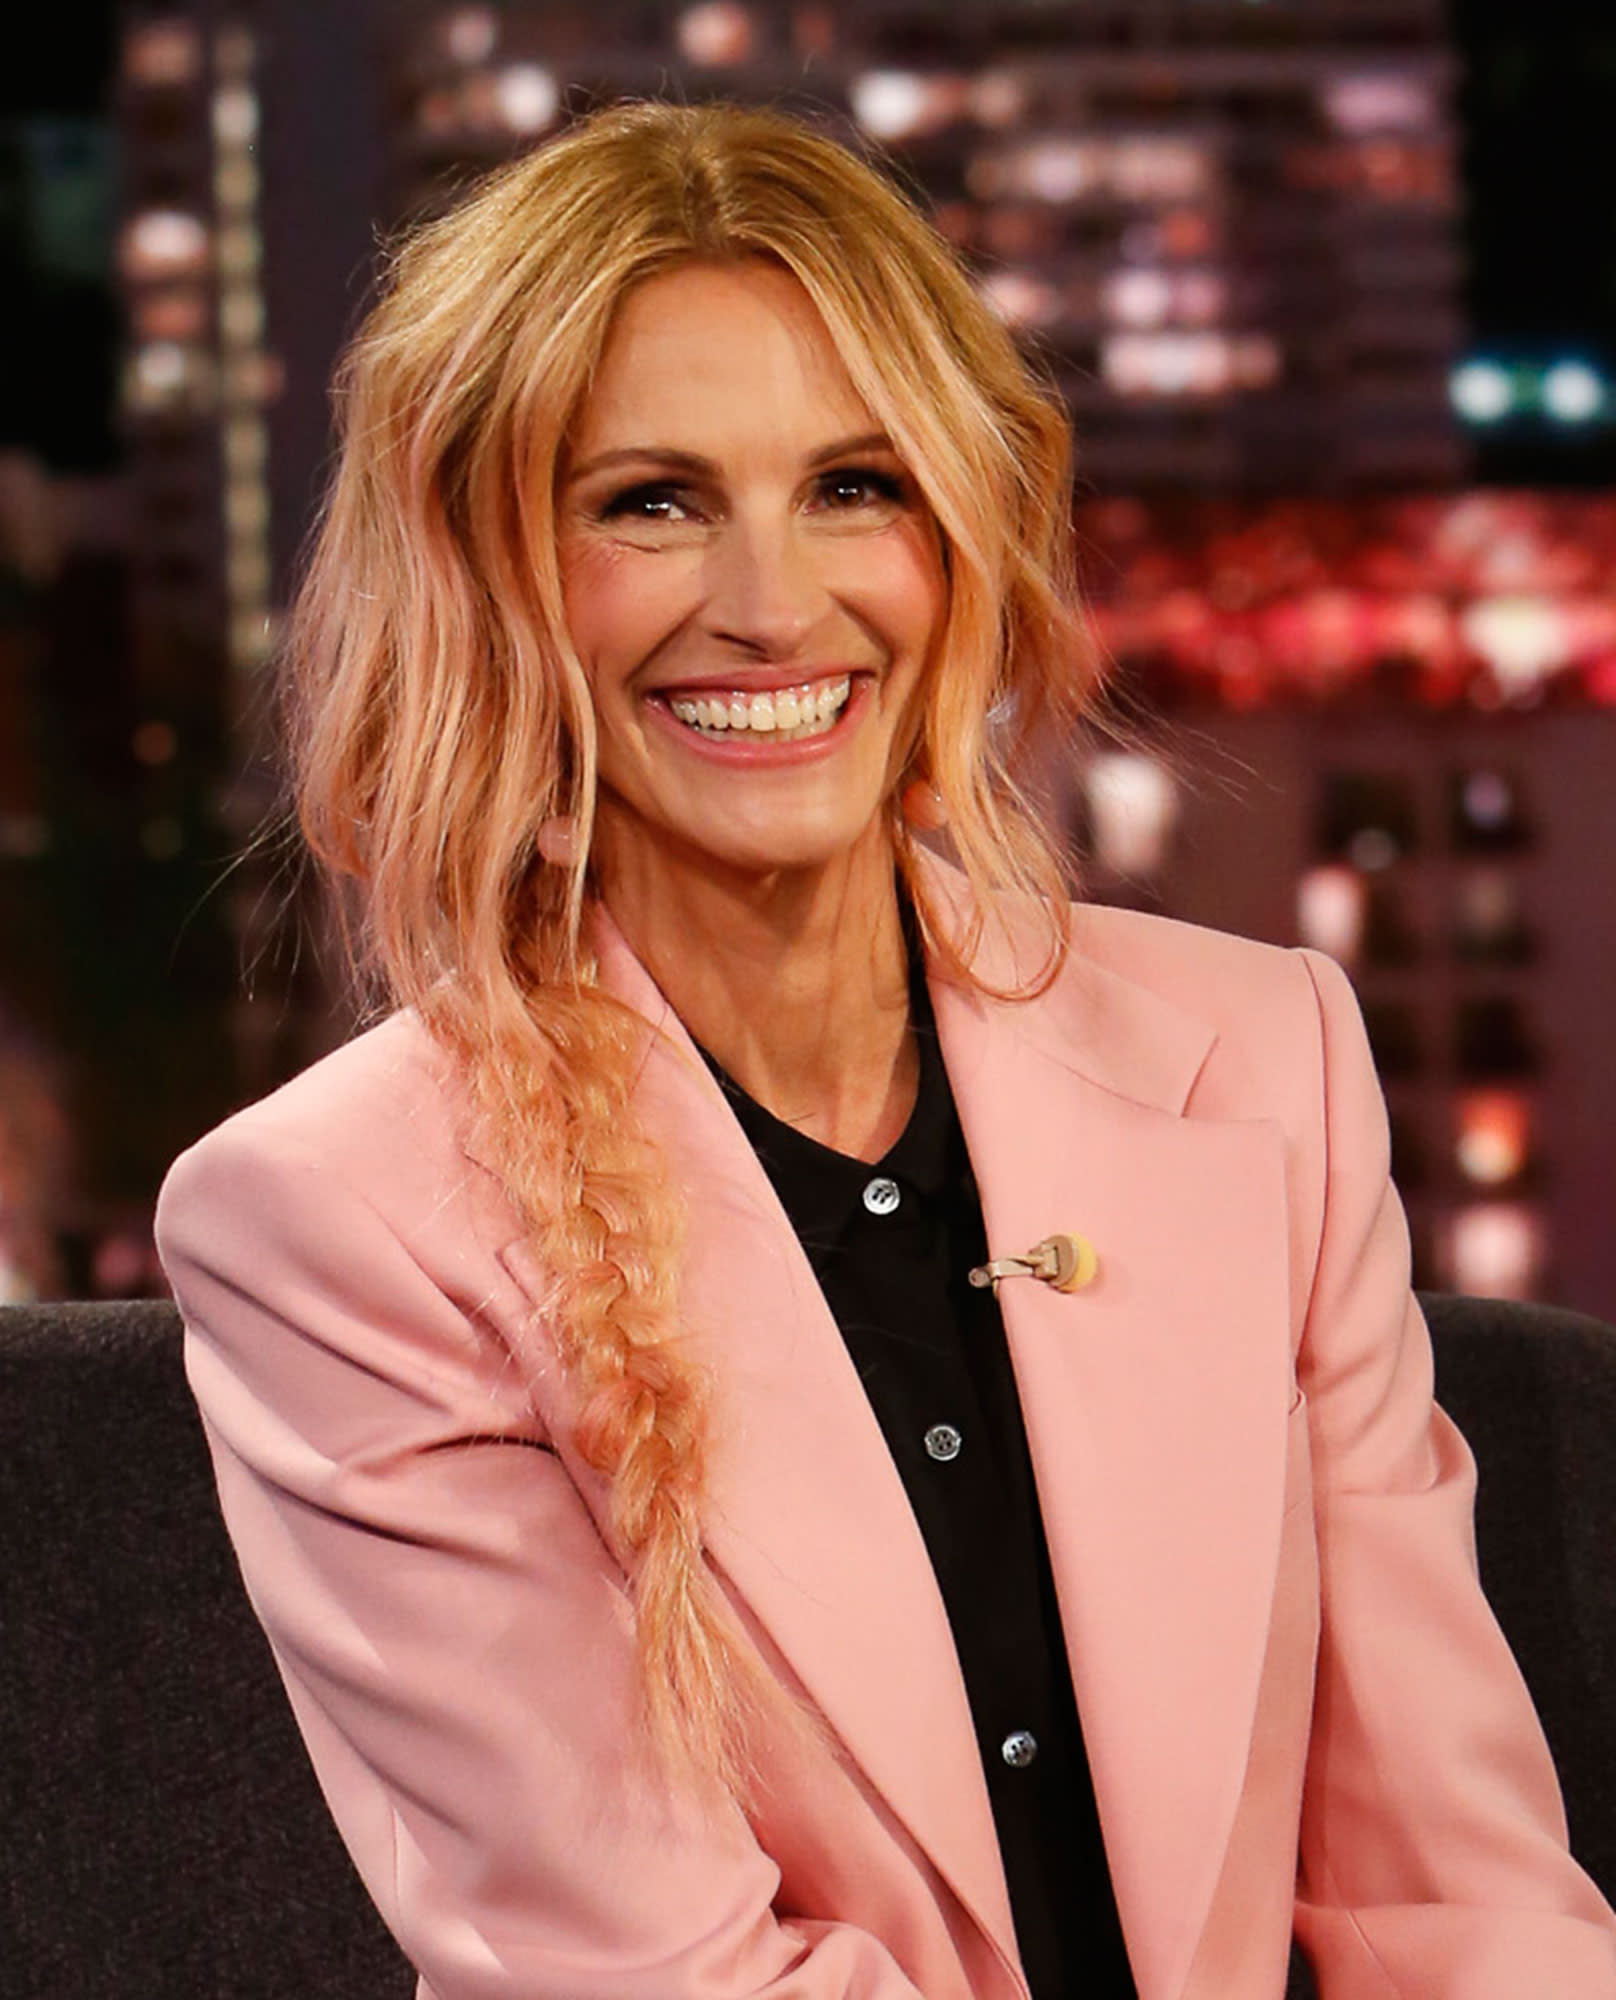 Julia Roberts Got a New Haircut That Everyone Is Freaking Out